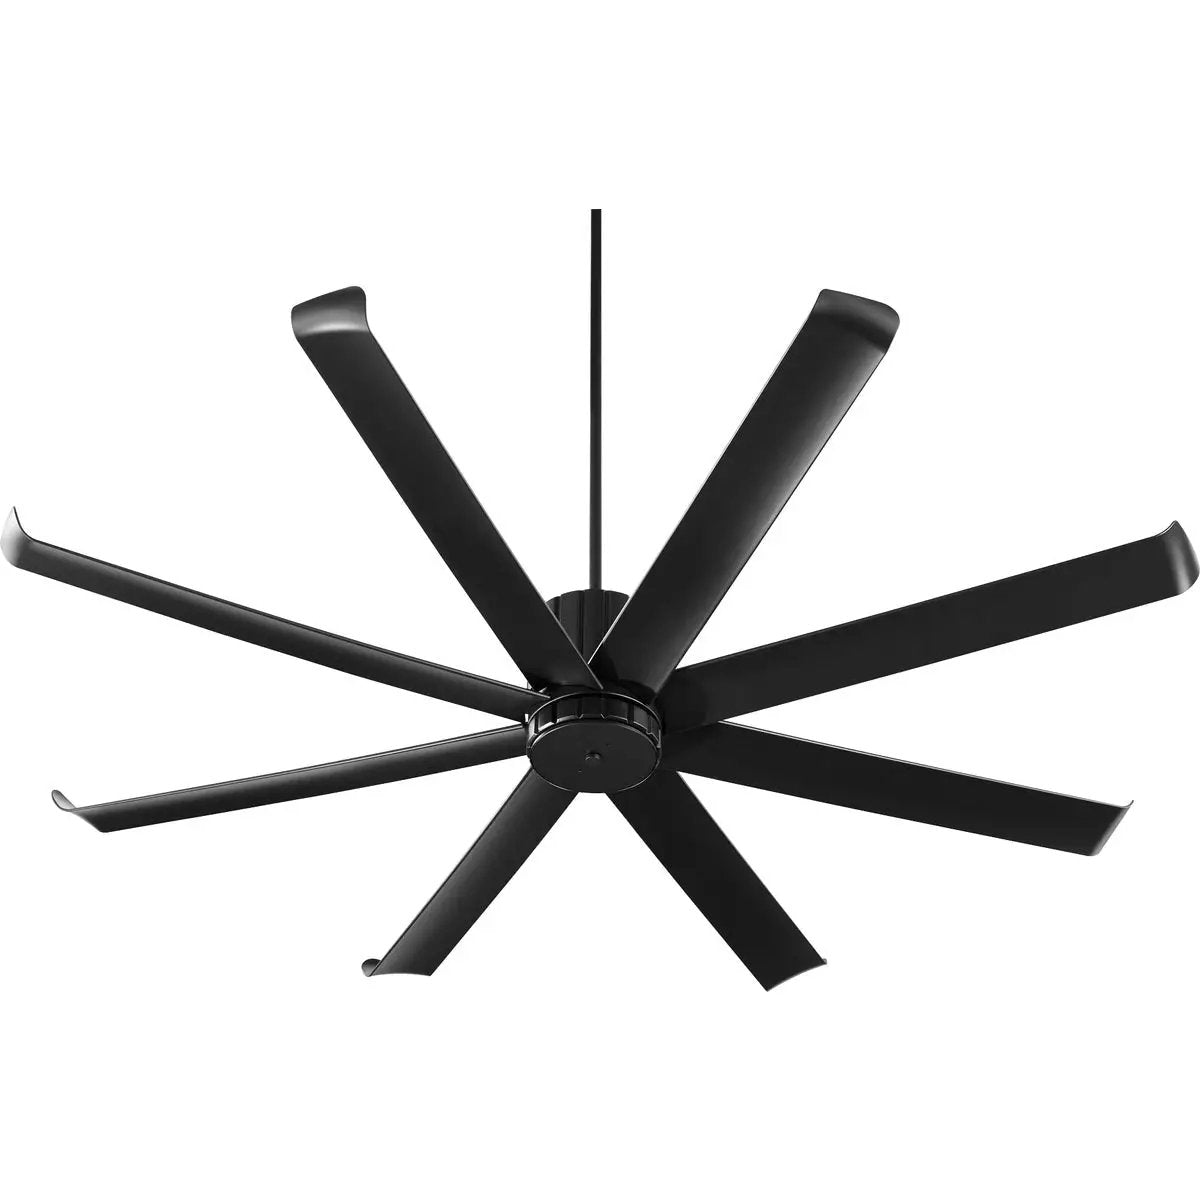 A sleek, sophisticated 72 Inch Ceiling Fan with upturned blades for maximum air circulation. Contemporary artistry meets functionality.